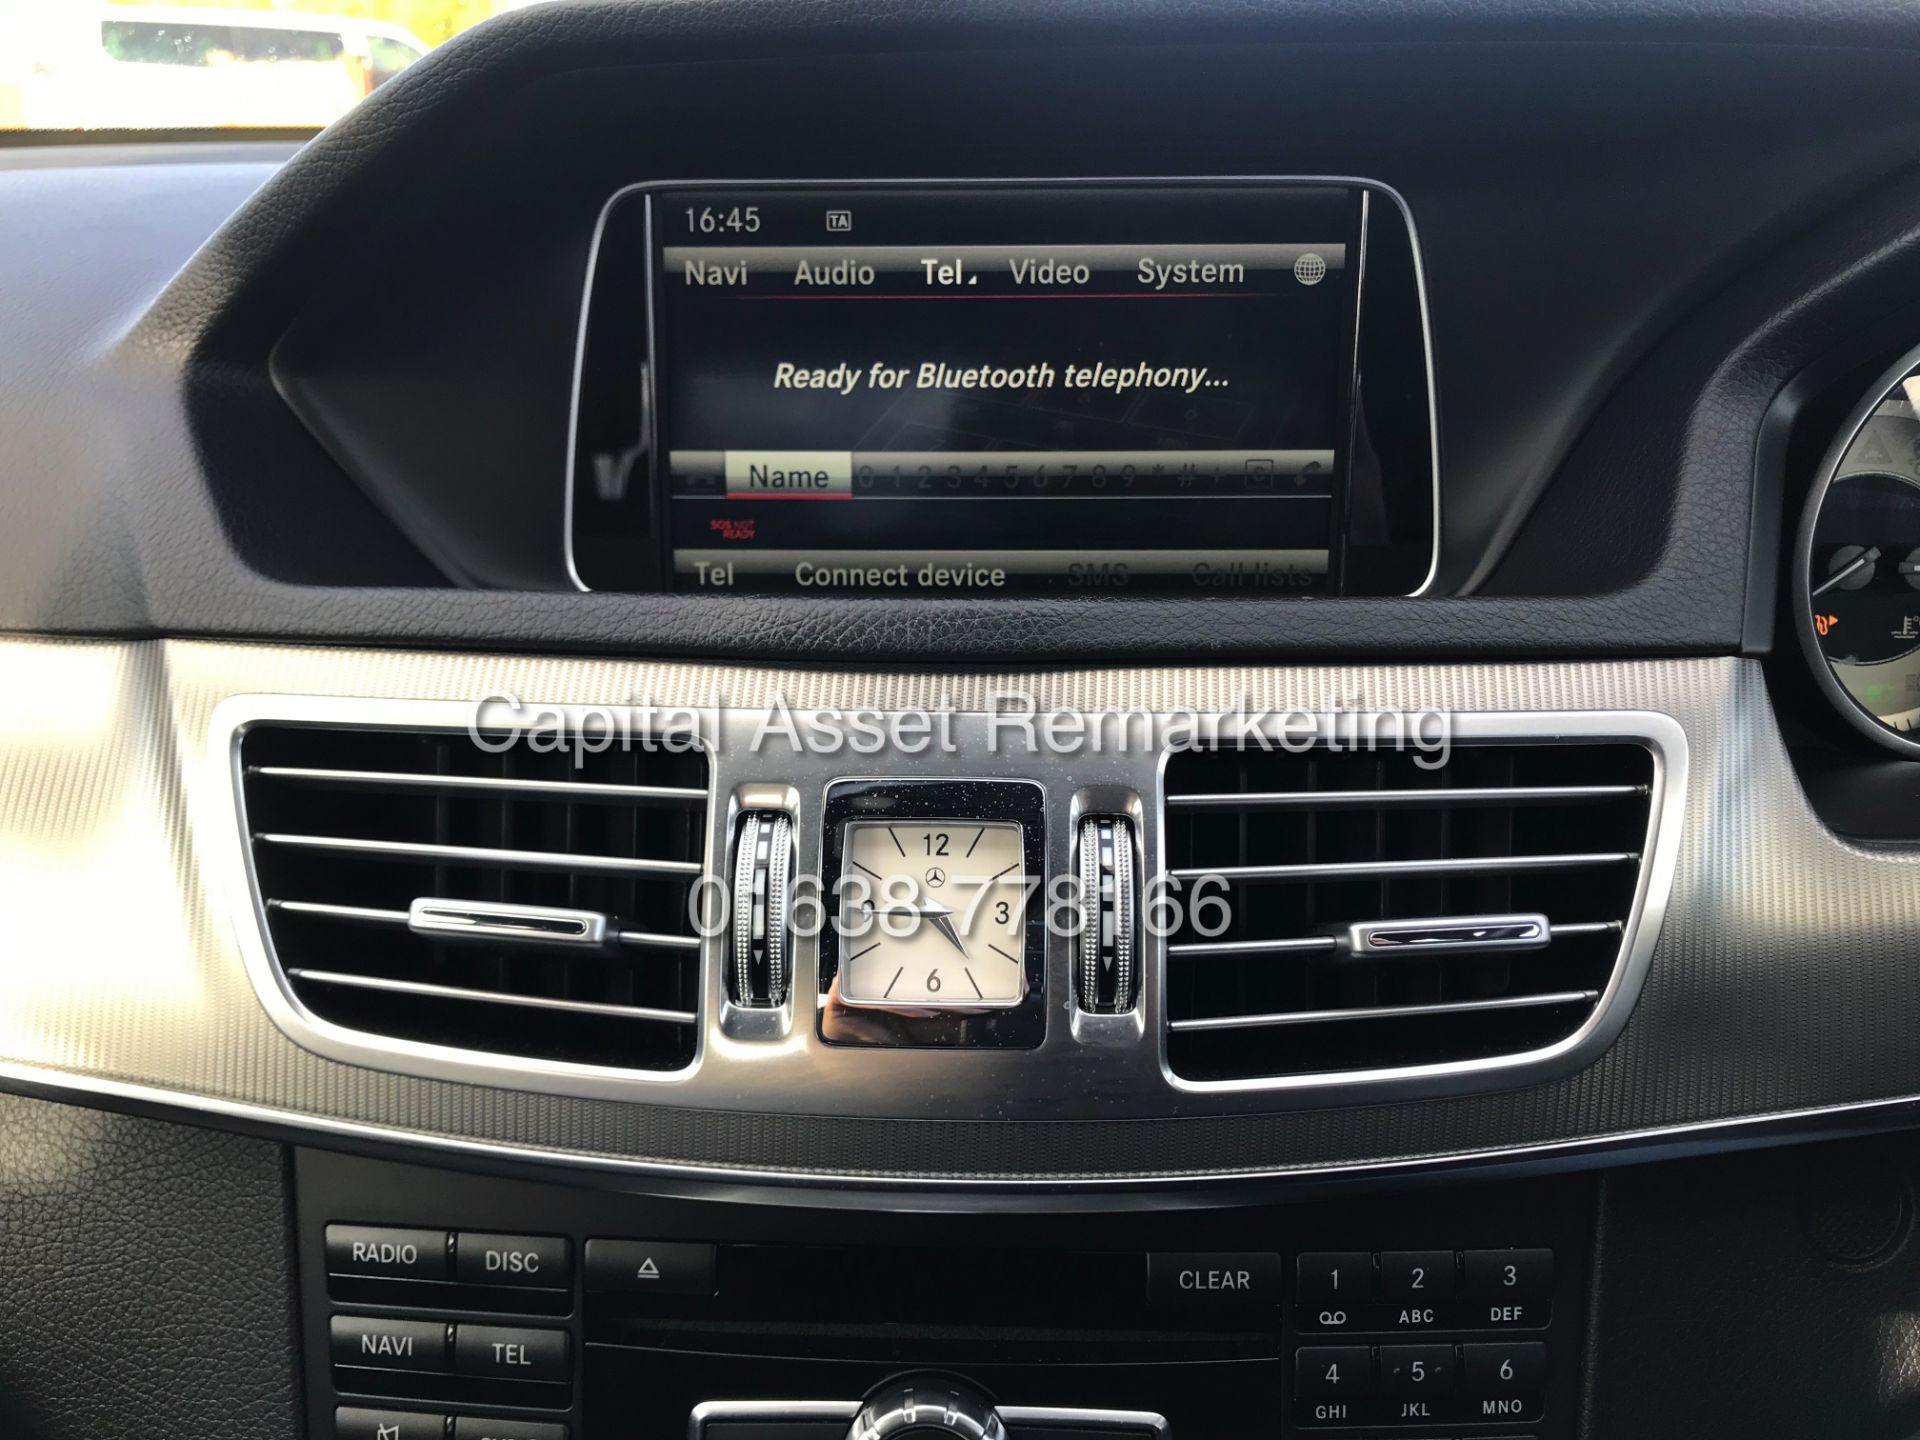 MERCEDES E220d "SPECIAL EQUIPMENT" 7G AUTO (64 REG) SAT NAV - FULL LEATHER - 1 OWNER - CLIMATE - Image 19 of 24